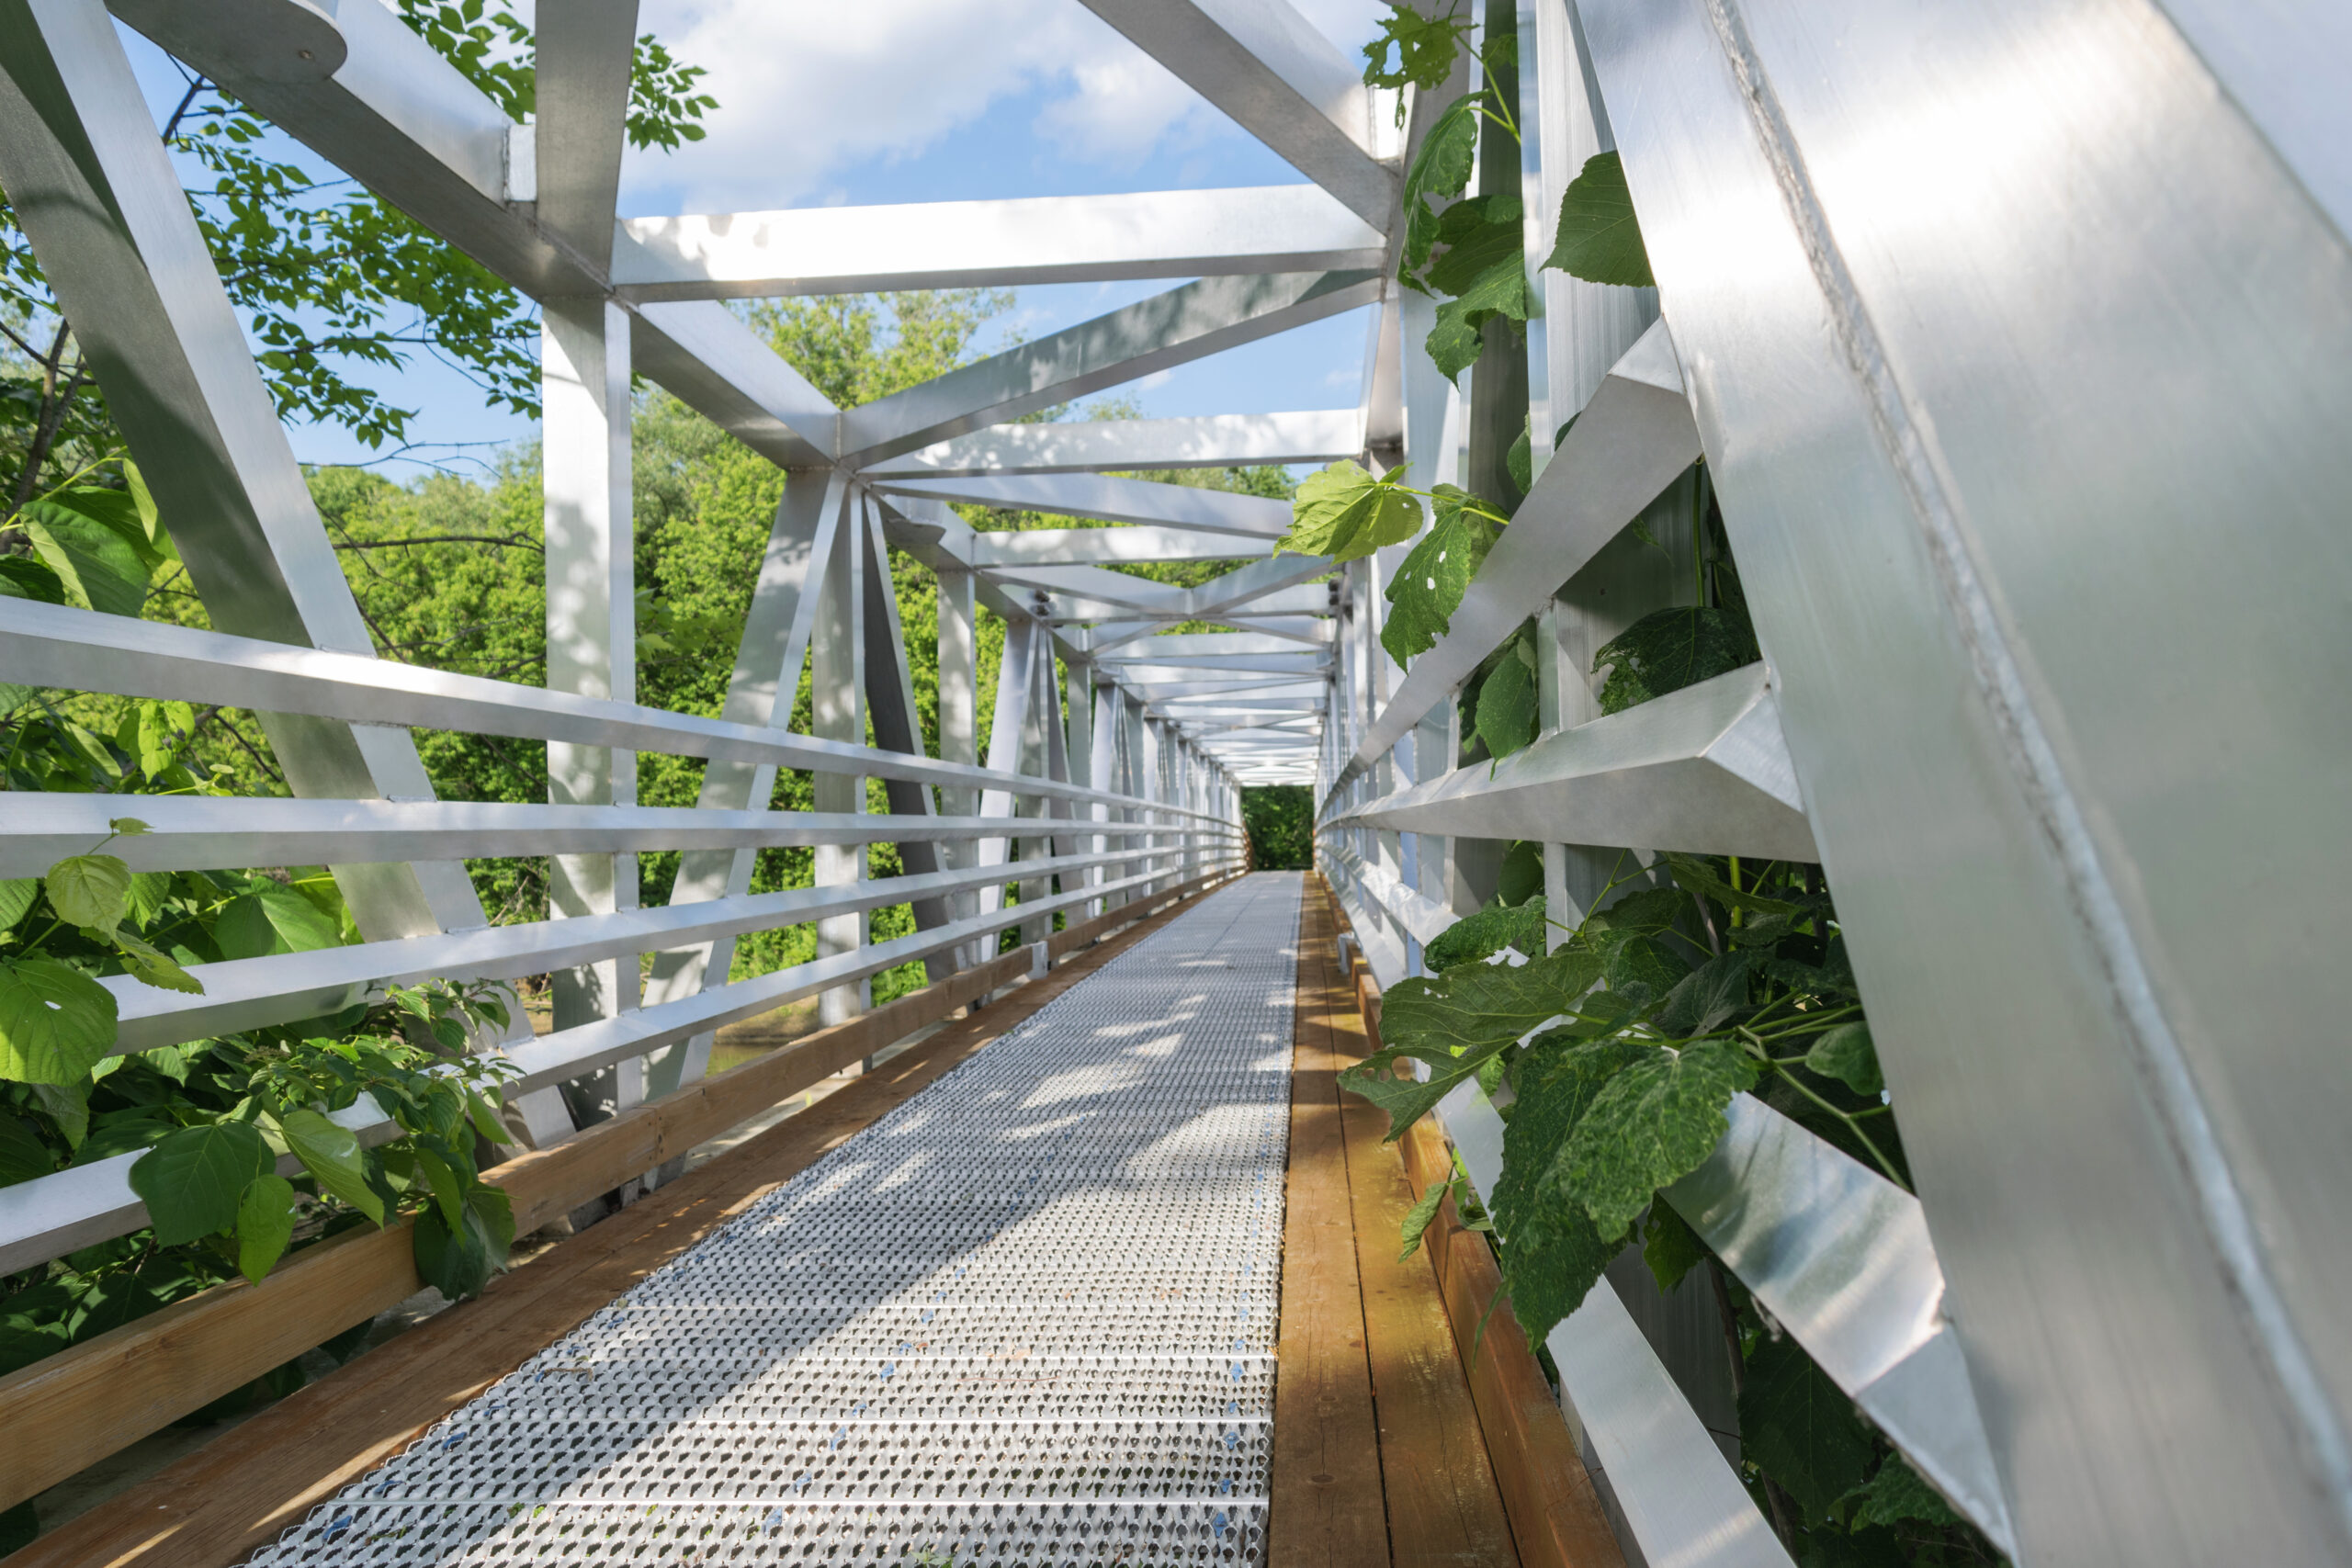 Custom pedestrian footbridge with natural wood accents and greenery